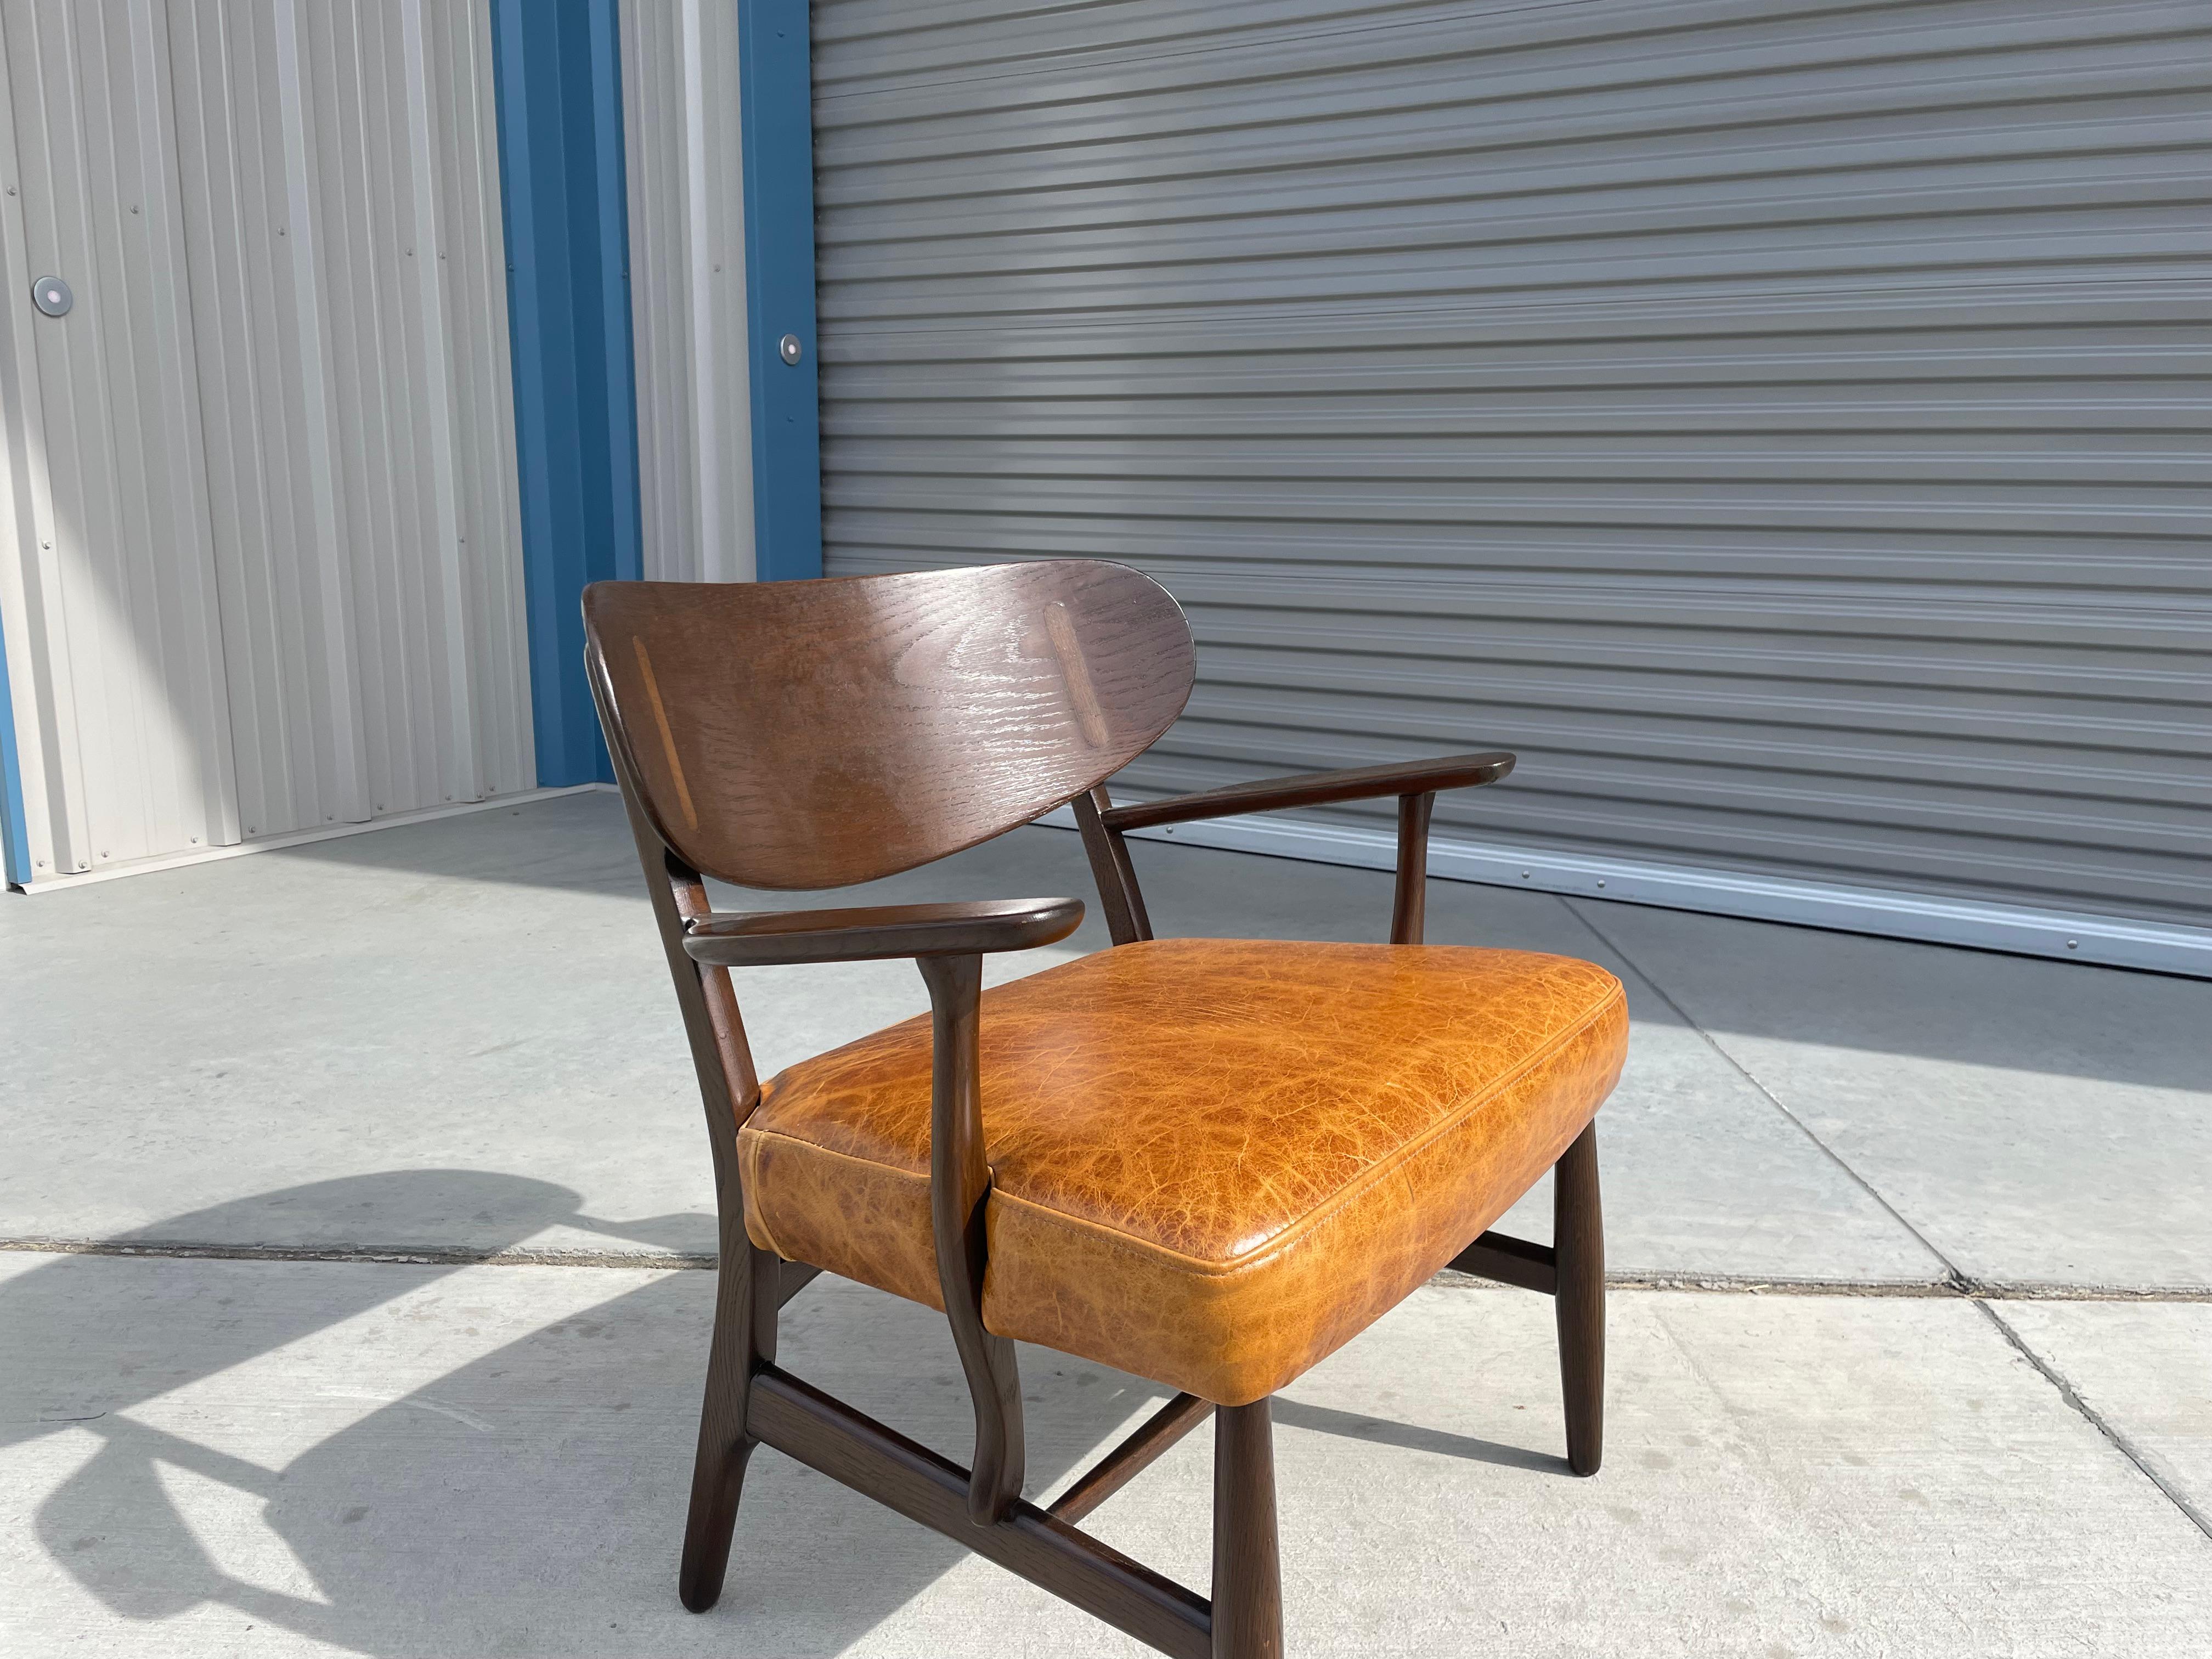 Midcentury CH-22 lounge chair designed by Hans Wegner and manufactured by Carl Hansen and Son in Denmark circa 1950s. This fantastic lounge chair features a dark oak frame and is newly reupholstered in brown leather fabric. This chair provides